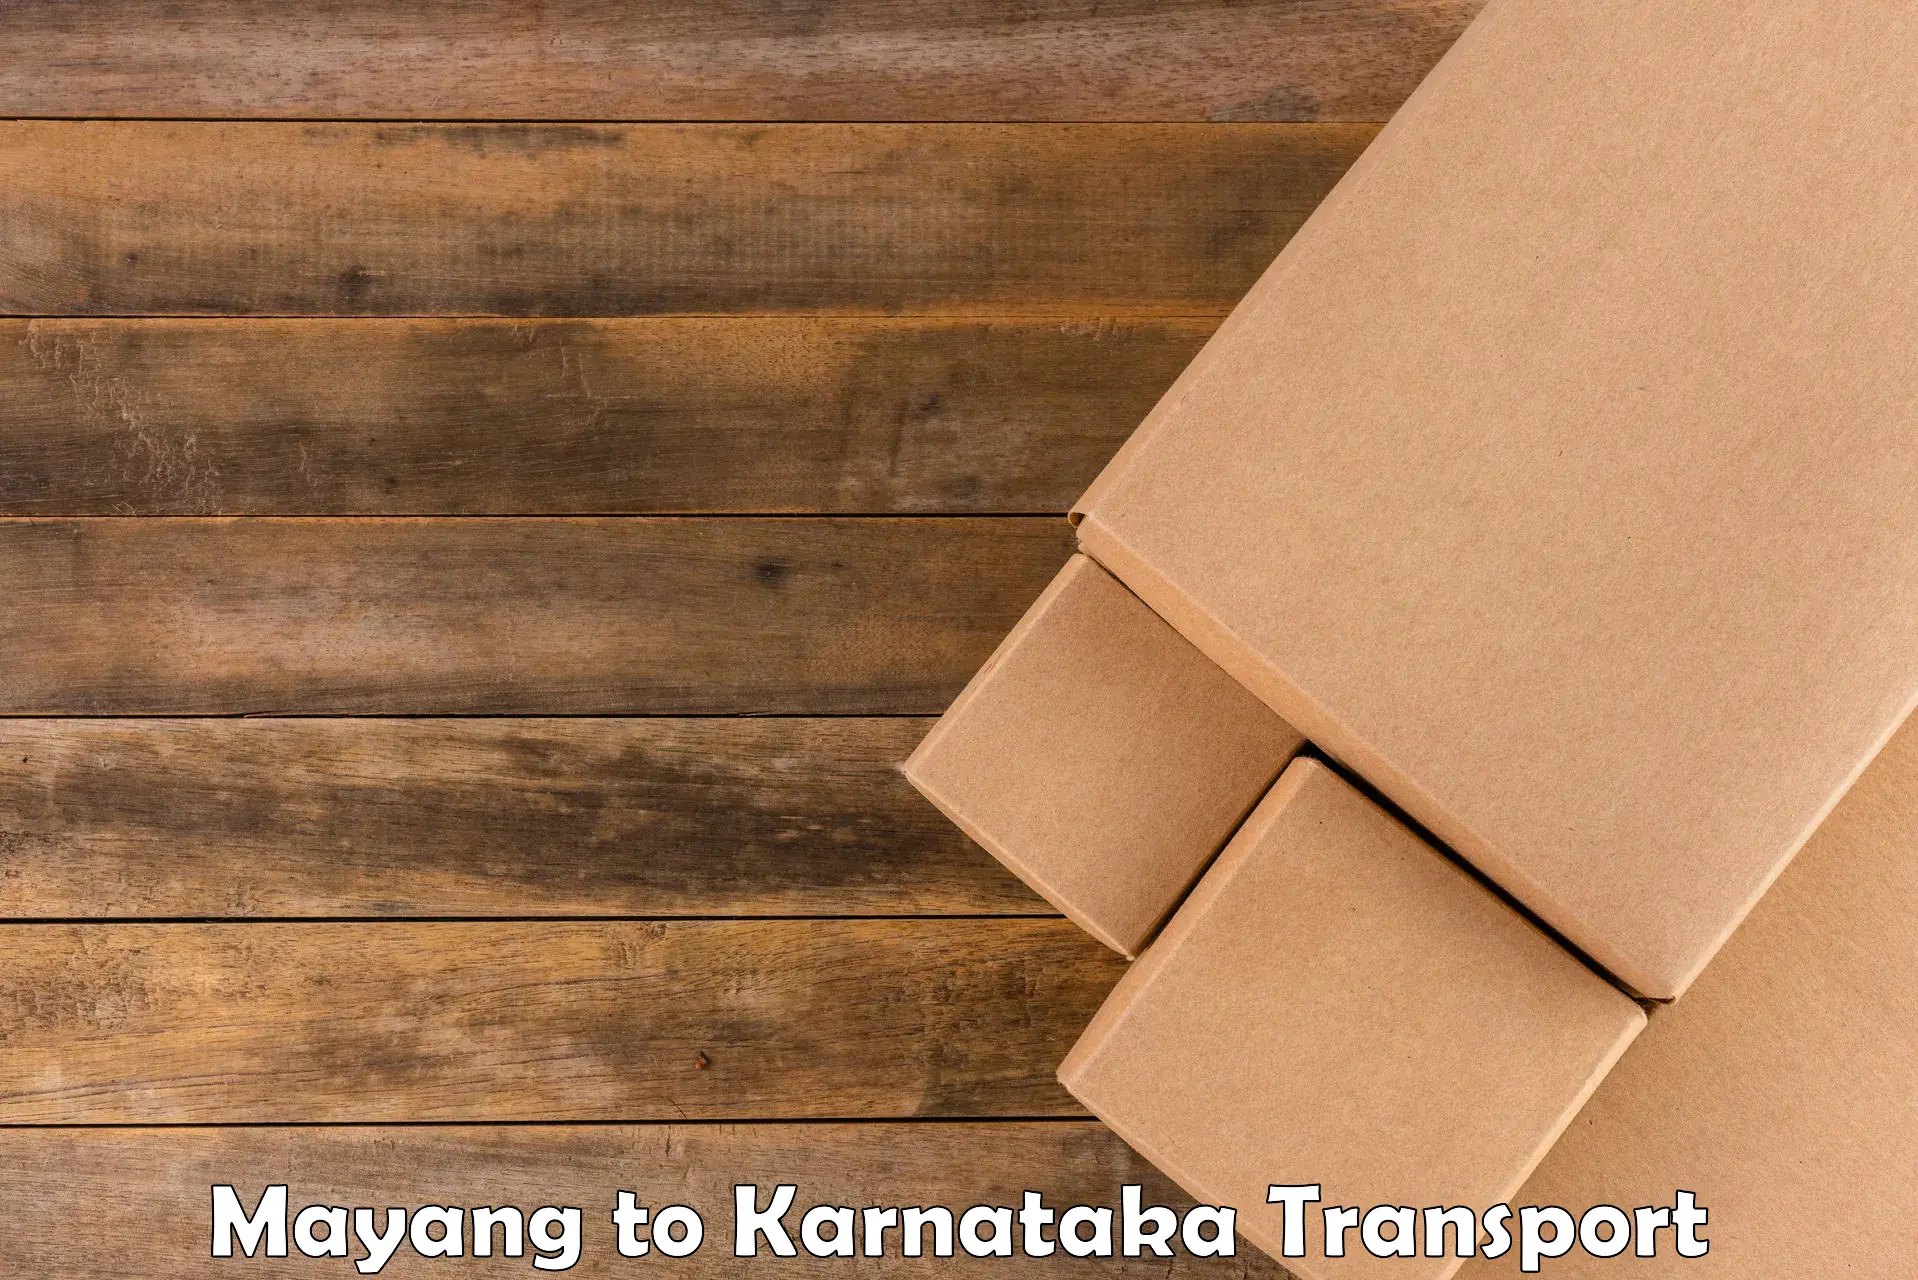 Truck transport companies in India Mayang to Rattihalli